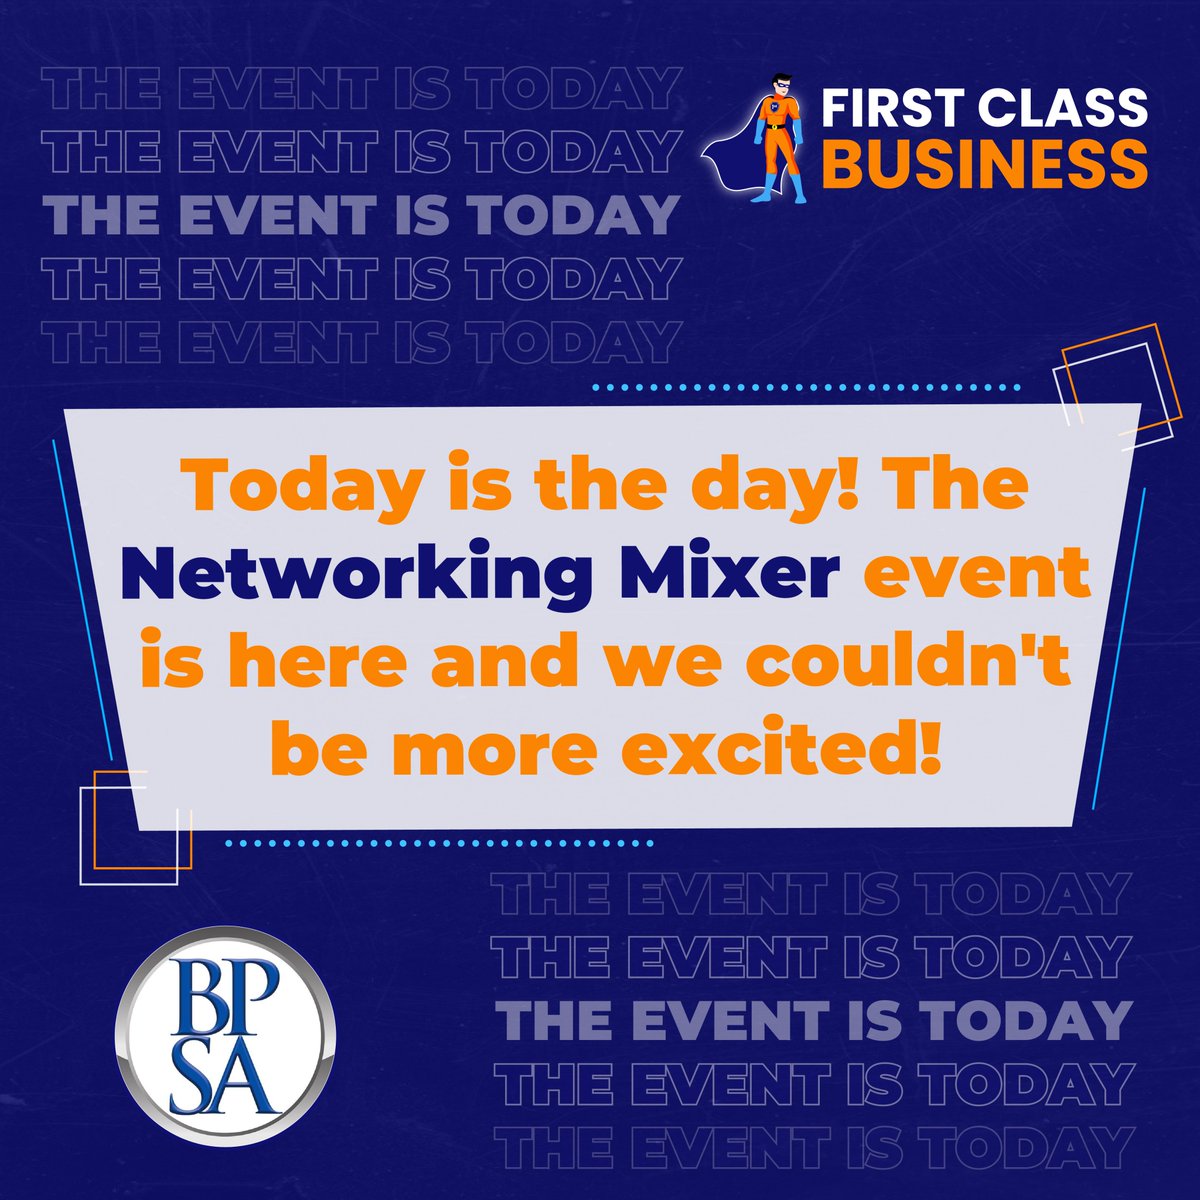 🎉 TODAY'S THE DAY! 🎉 The Networking Mixer event, brought to you by Business Professionals of San Antonio (BP SA), is finally here and we're thrilled! Don't miss out on this opportunity to connect and grow your business. See you there!

#NetworkingMixer #BPSA #BusinessGrowth